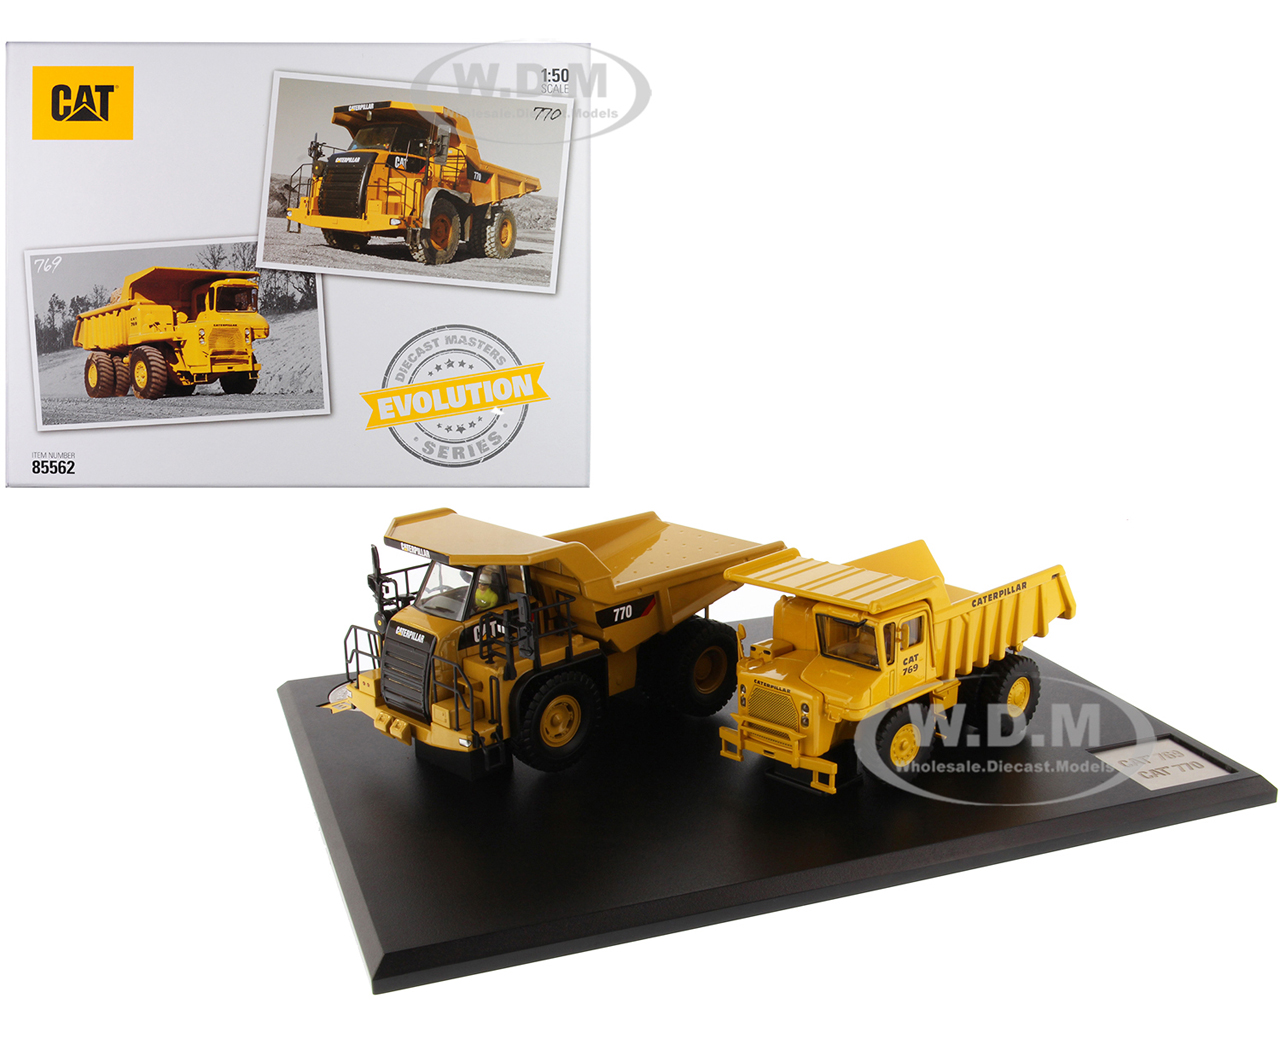 Image of CAT Caterpillar 769 Off-Highway Truck (1963-2006) and CAT Caterpillar 770 Off-Highway Truck (2007-Present) with Operators "Evolution Series" Set of 2